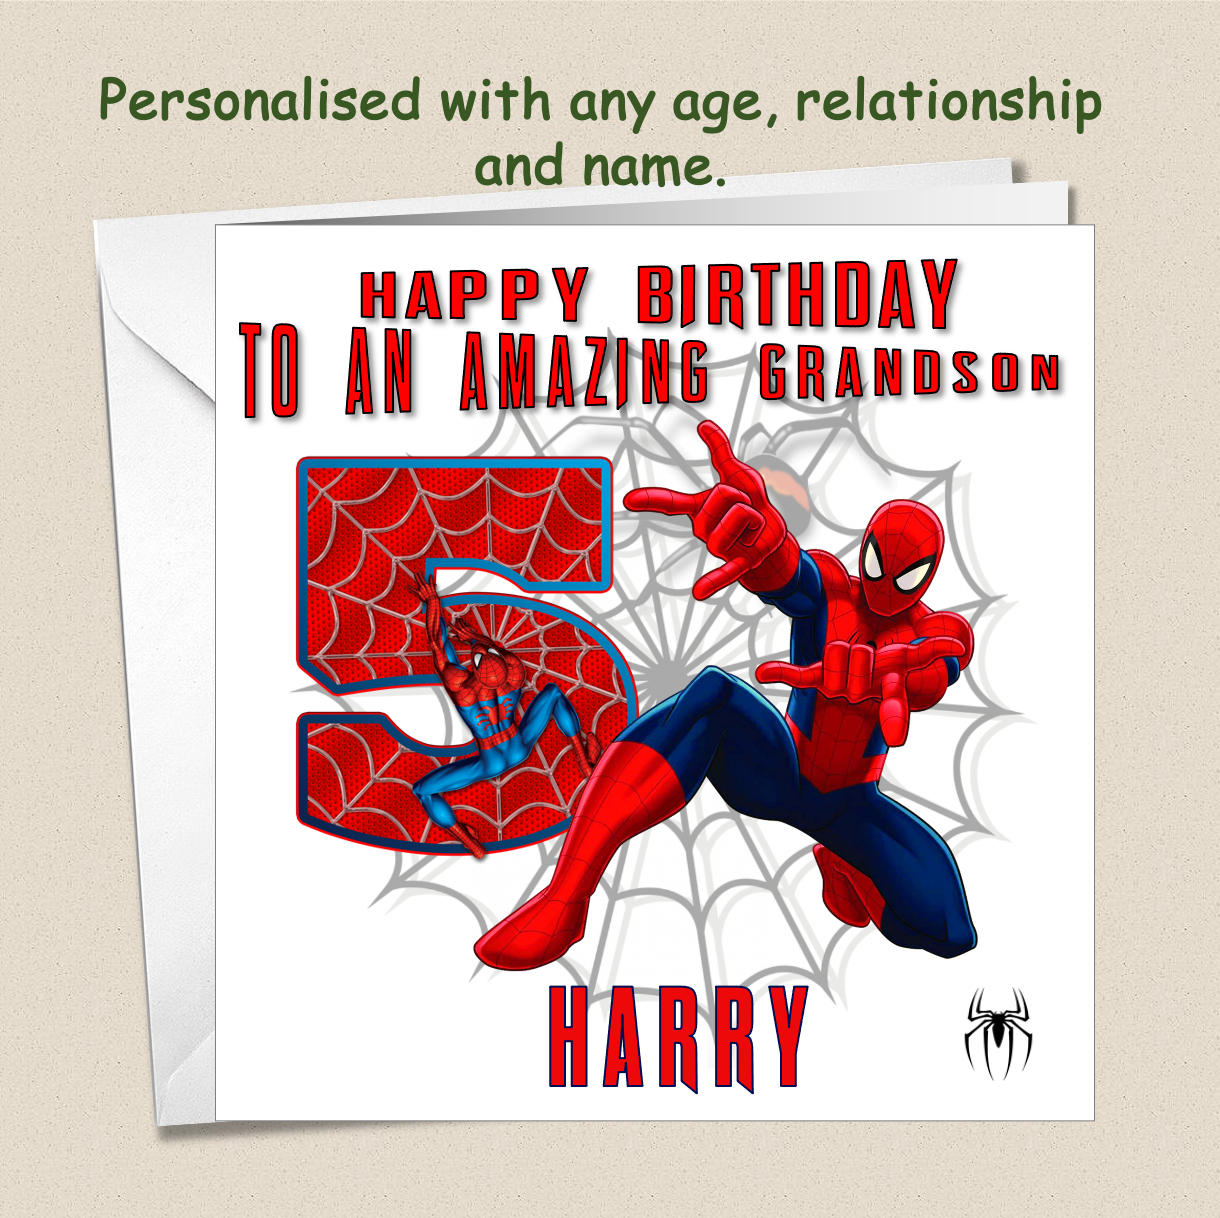 Personalised Spiderman Birthday Cards with name and relationship - SPID6